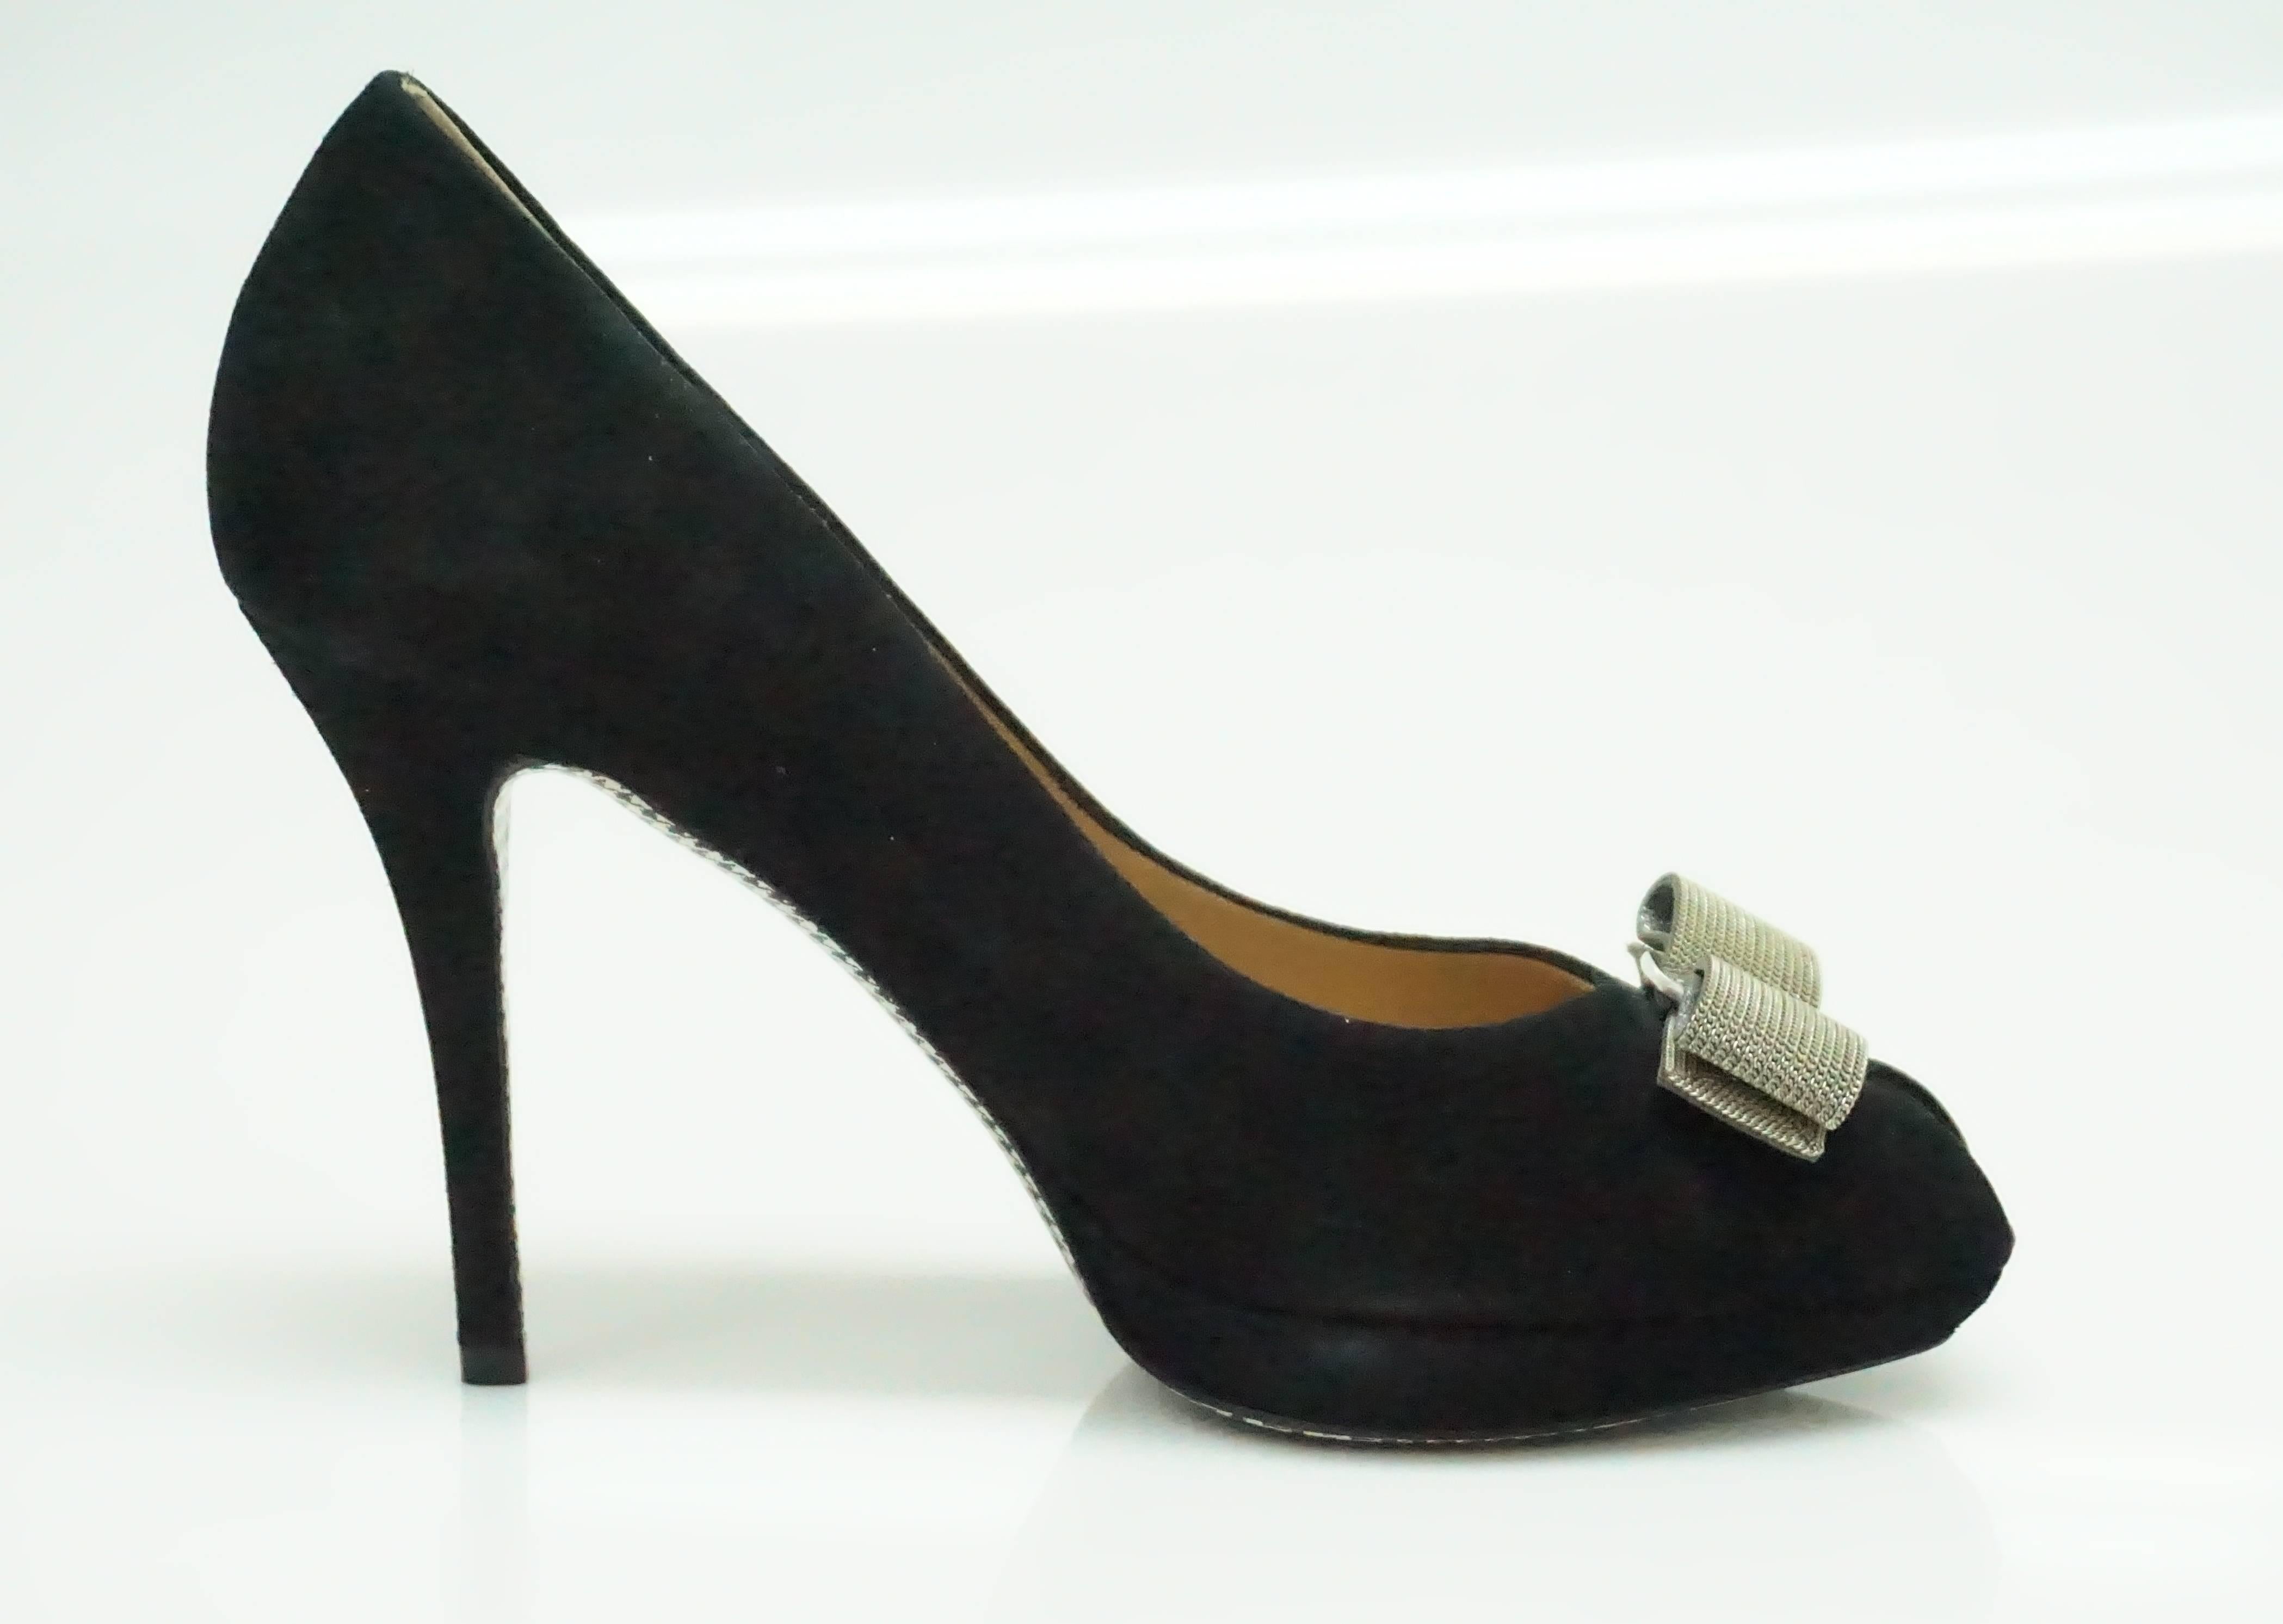 Salvatore Ferragamo Black Suede w/ Silver Mesh Bow Pump - 9  These classic heels are in excellent condition. They have probably only been worn once. The entire shoe is made out of suede and the bottom of the shoe has a houndstooth pattern. There is